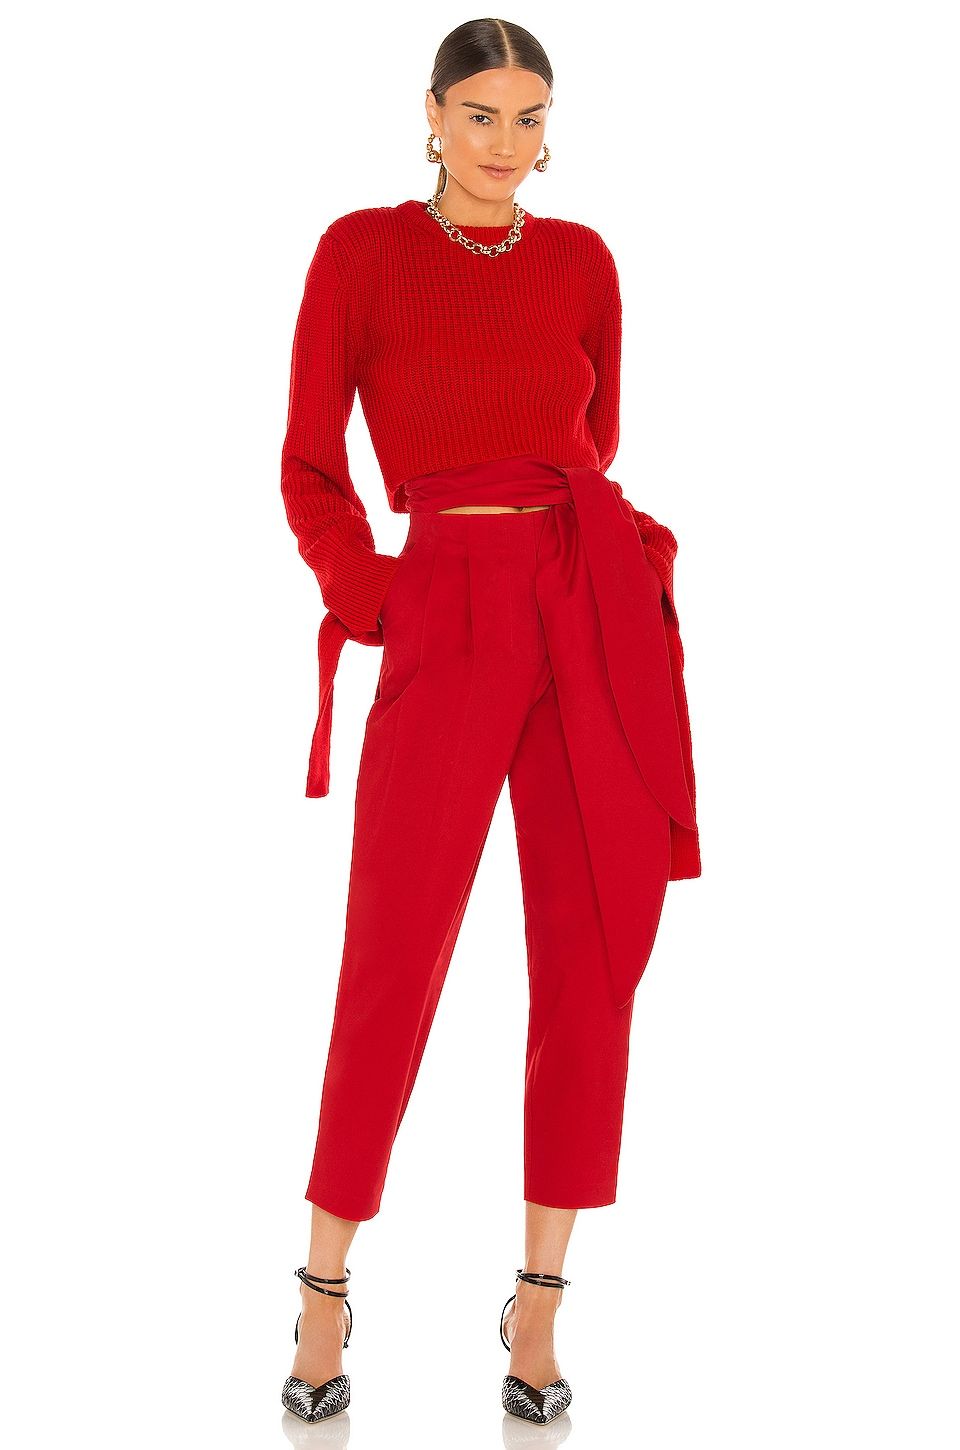 Casual Outfit With Faded Red Pants - une femme d'un certain âge